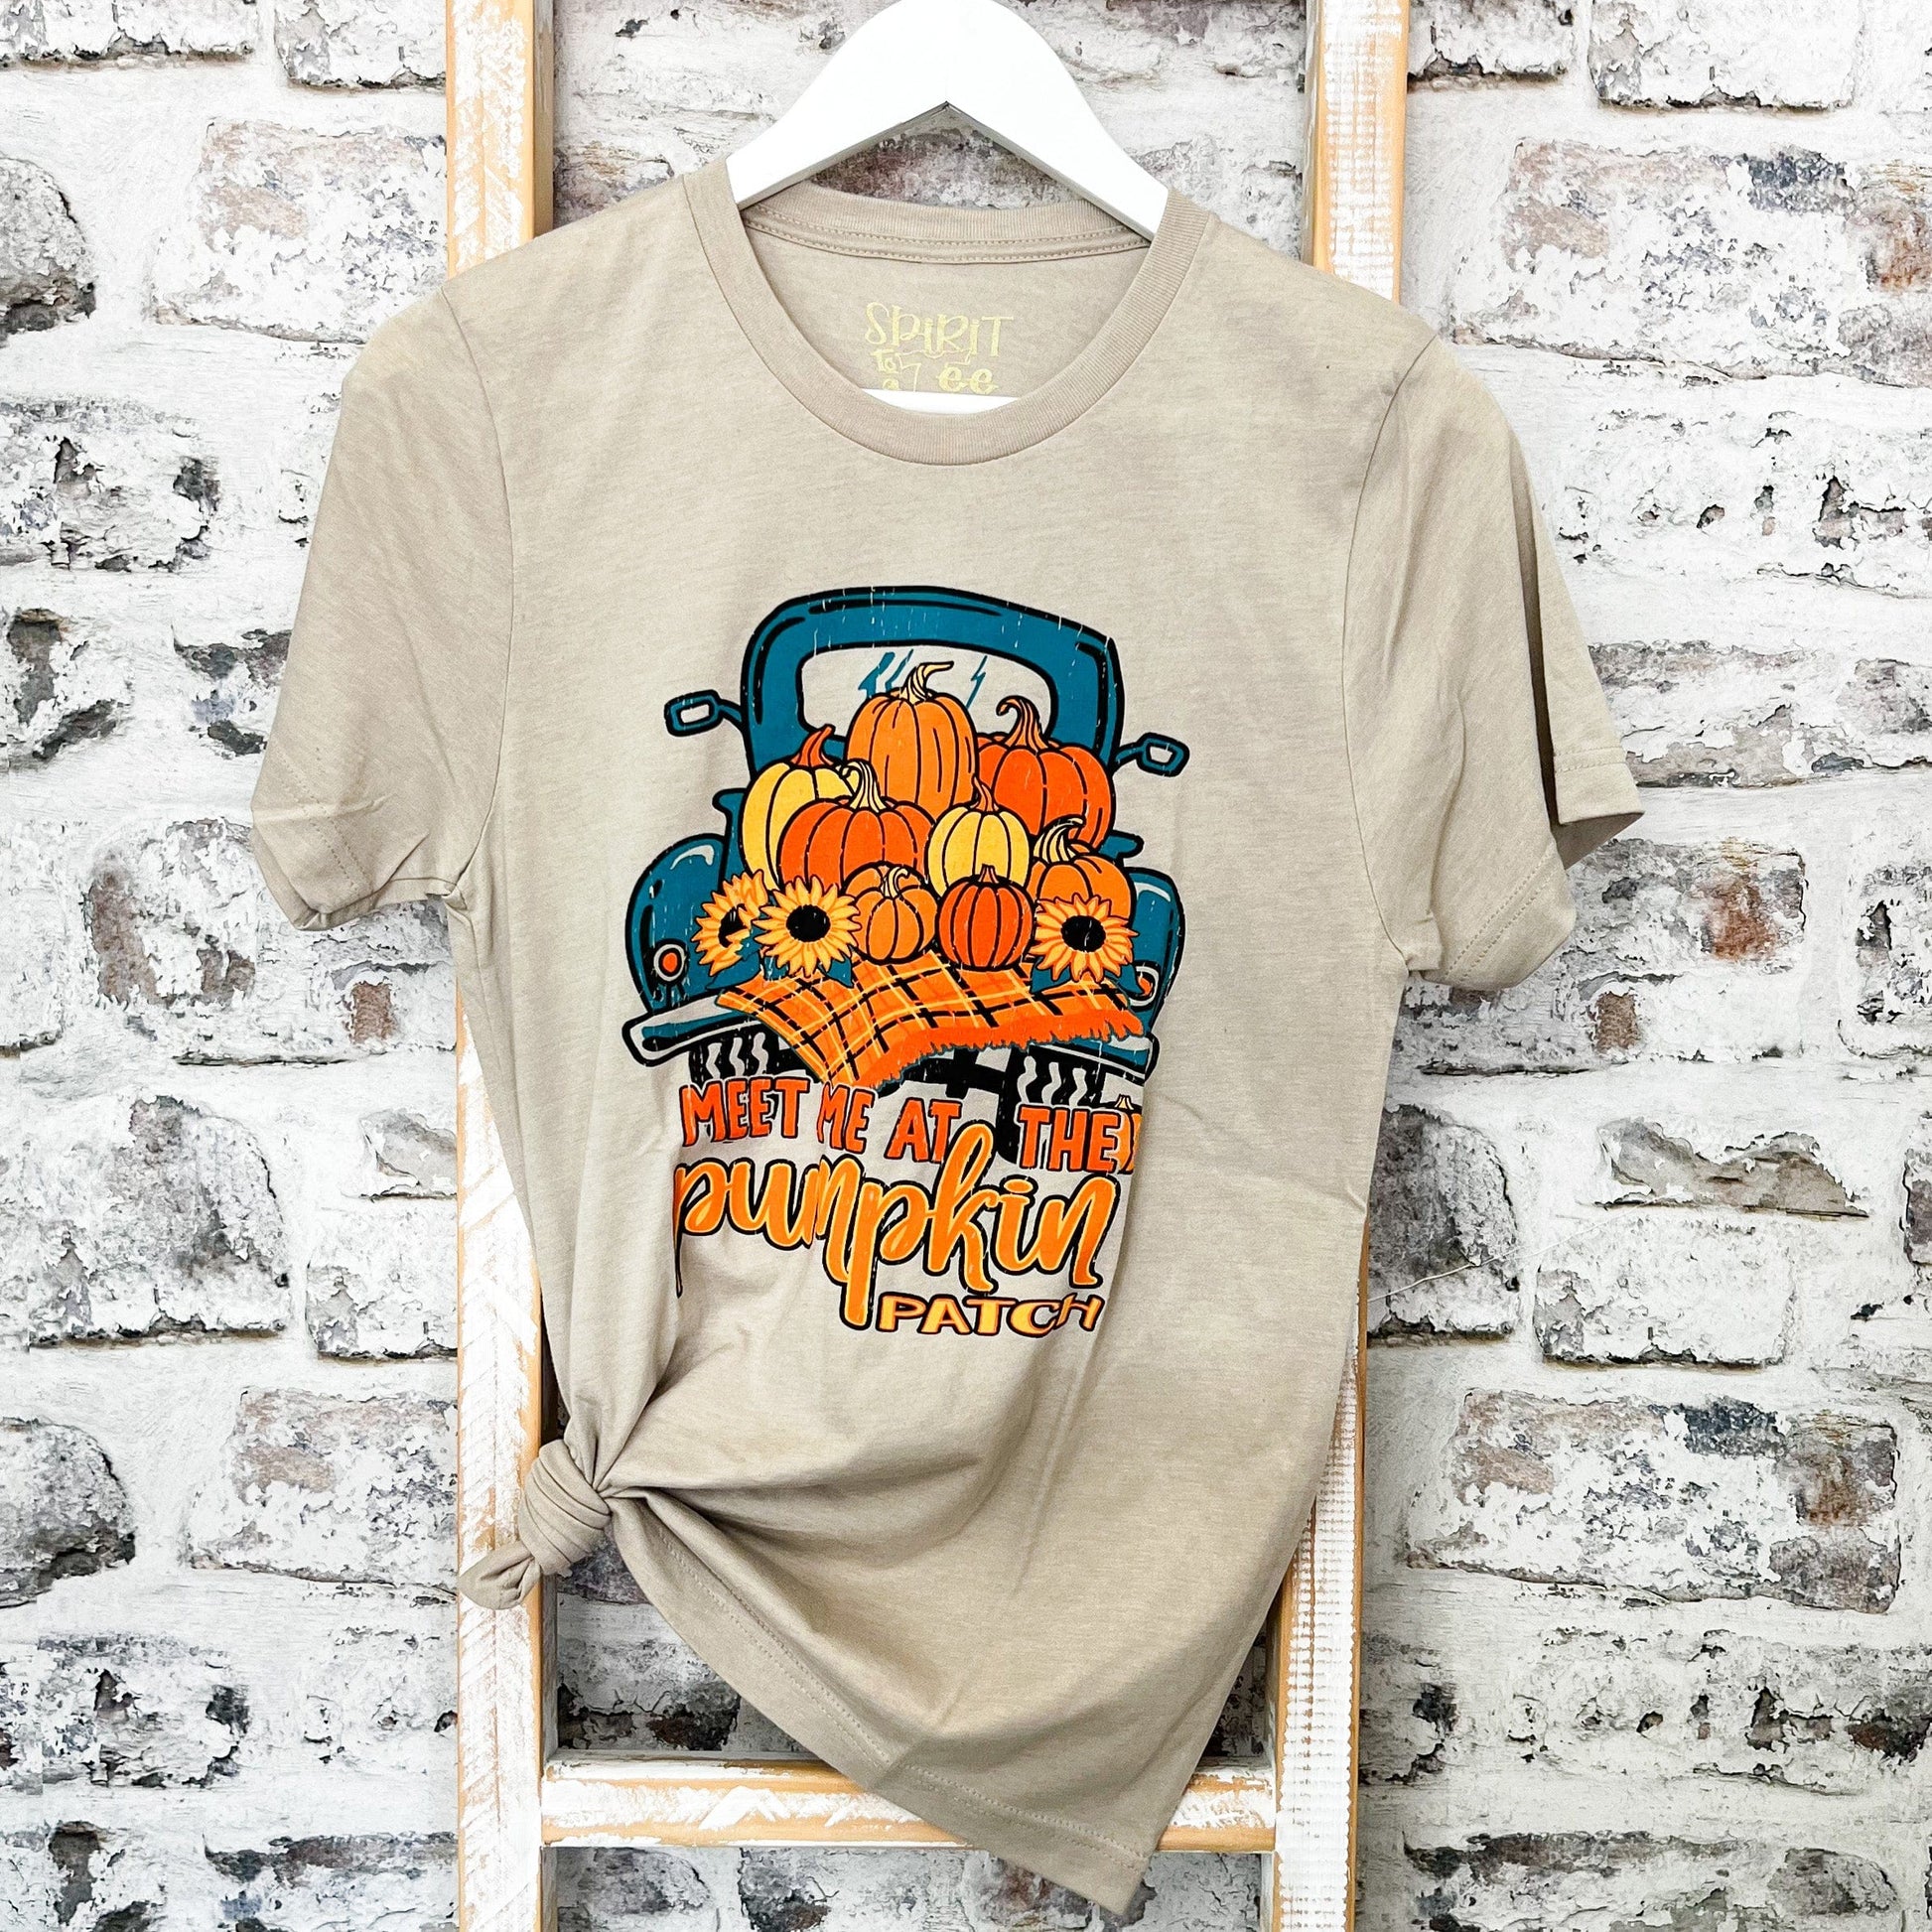 Envy Stylz Boutique Women - Apparel - Shirts - T-Shirts Meet Me At The Pumpkin Patch Truck Soft Graphic Tee